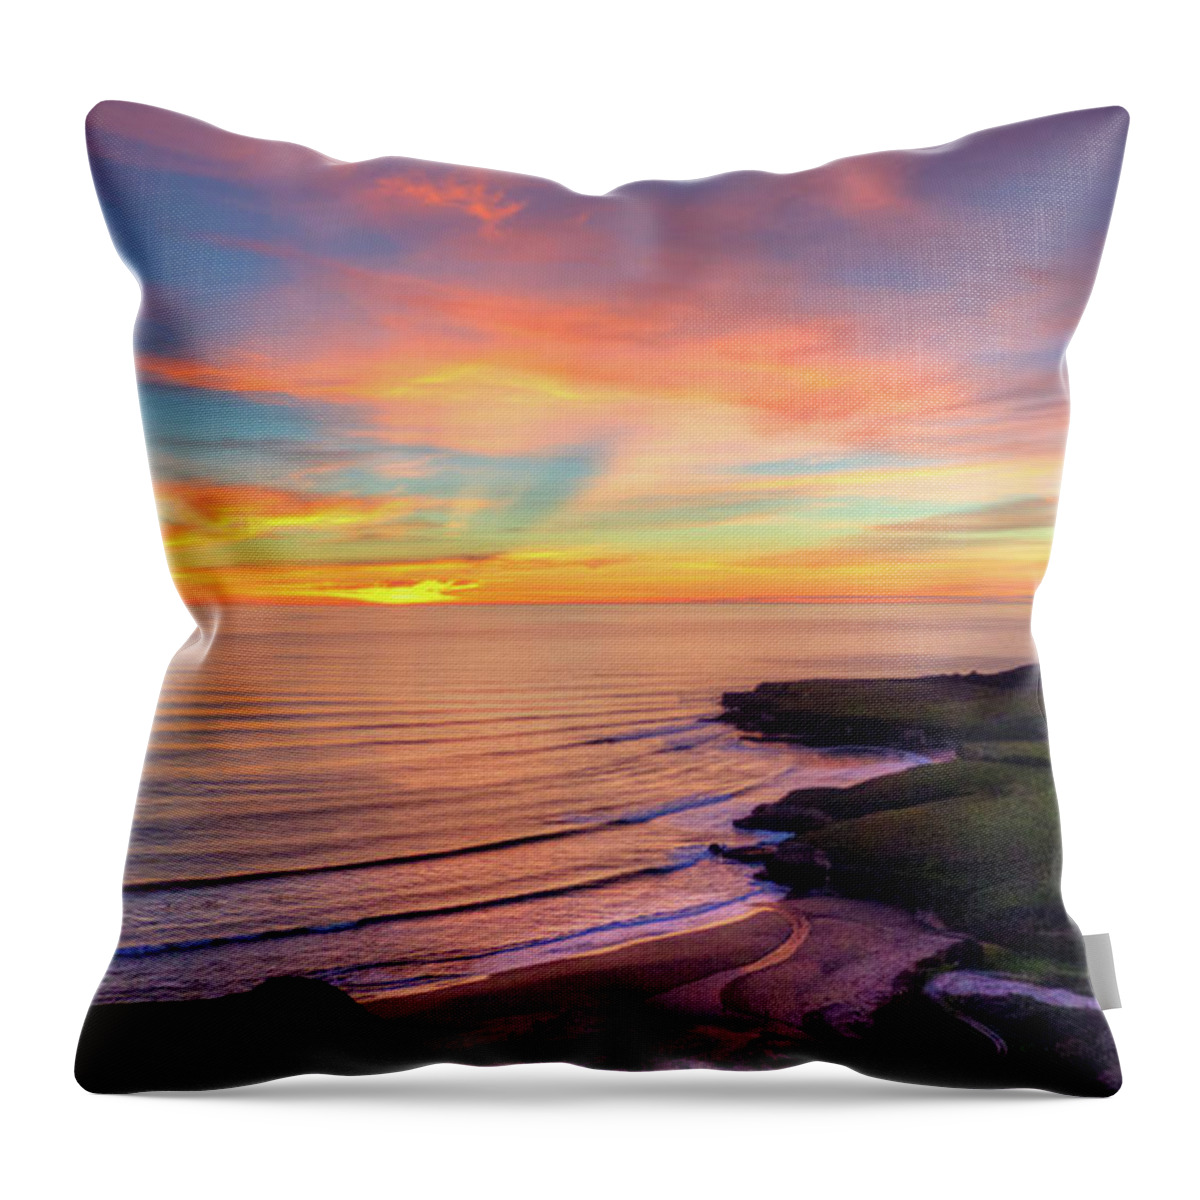 Above Throw Pillow featuring the photograph Pastel Palette by David Levy